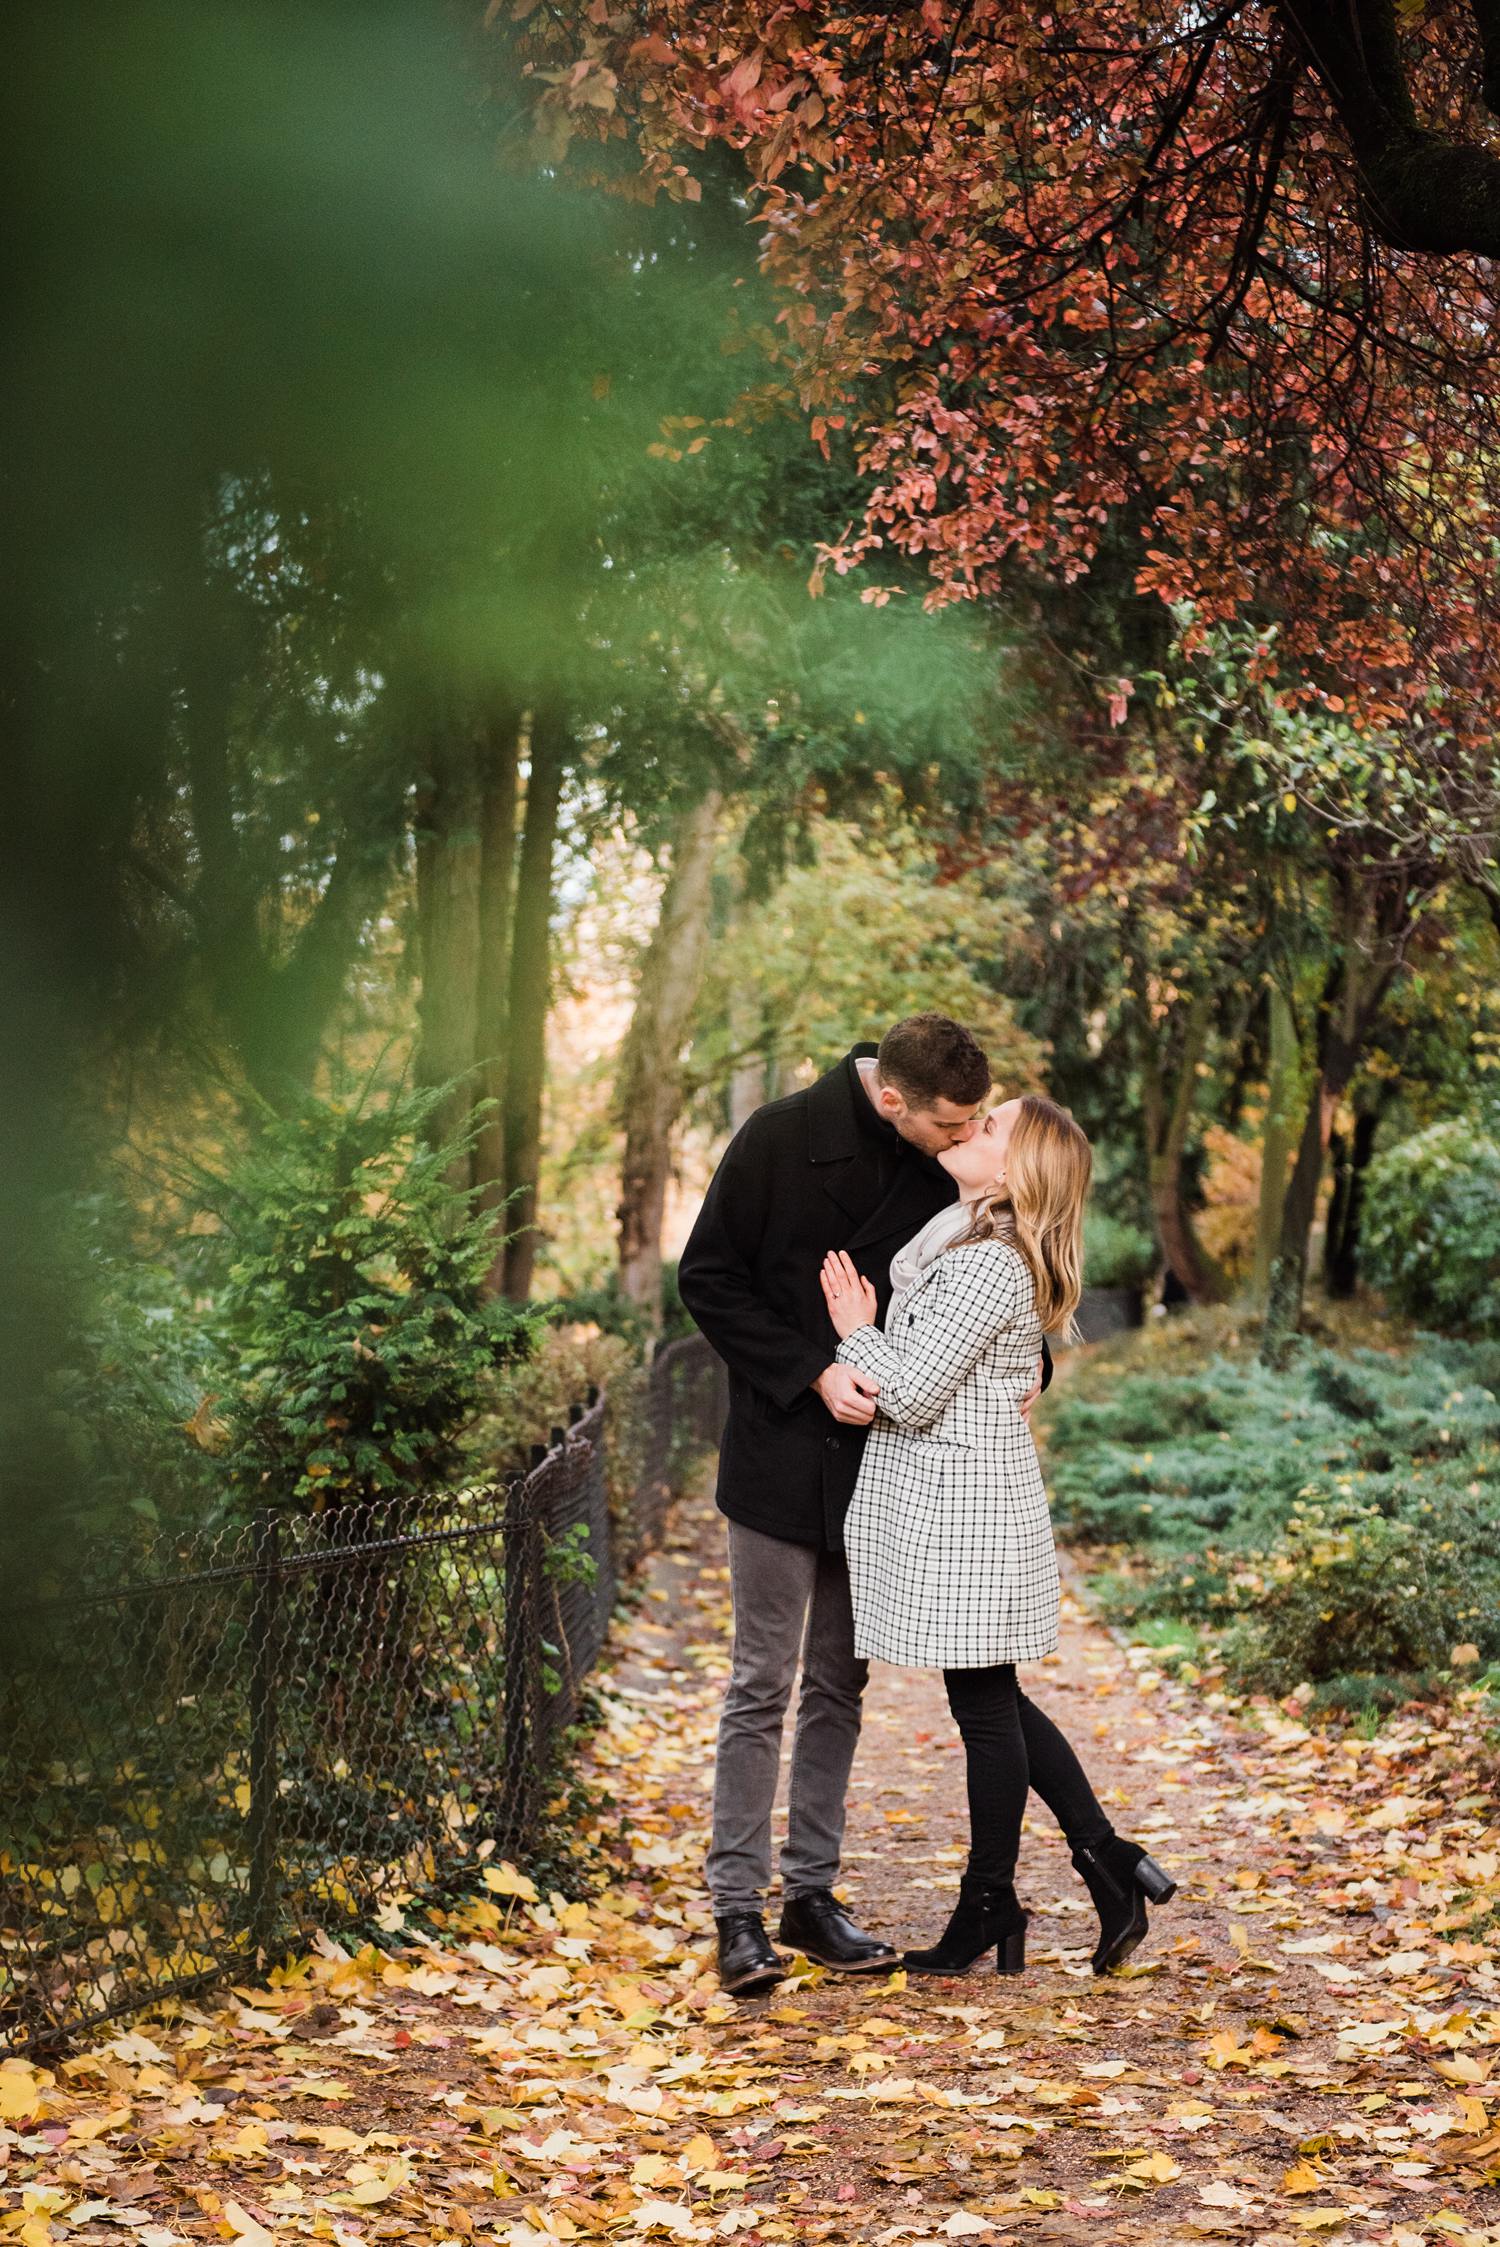 photo of couple kissing on a garden pathway at the beginning of fall with trees just starting to turn: part of an engagement photography session in Paris